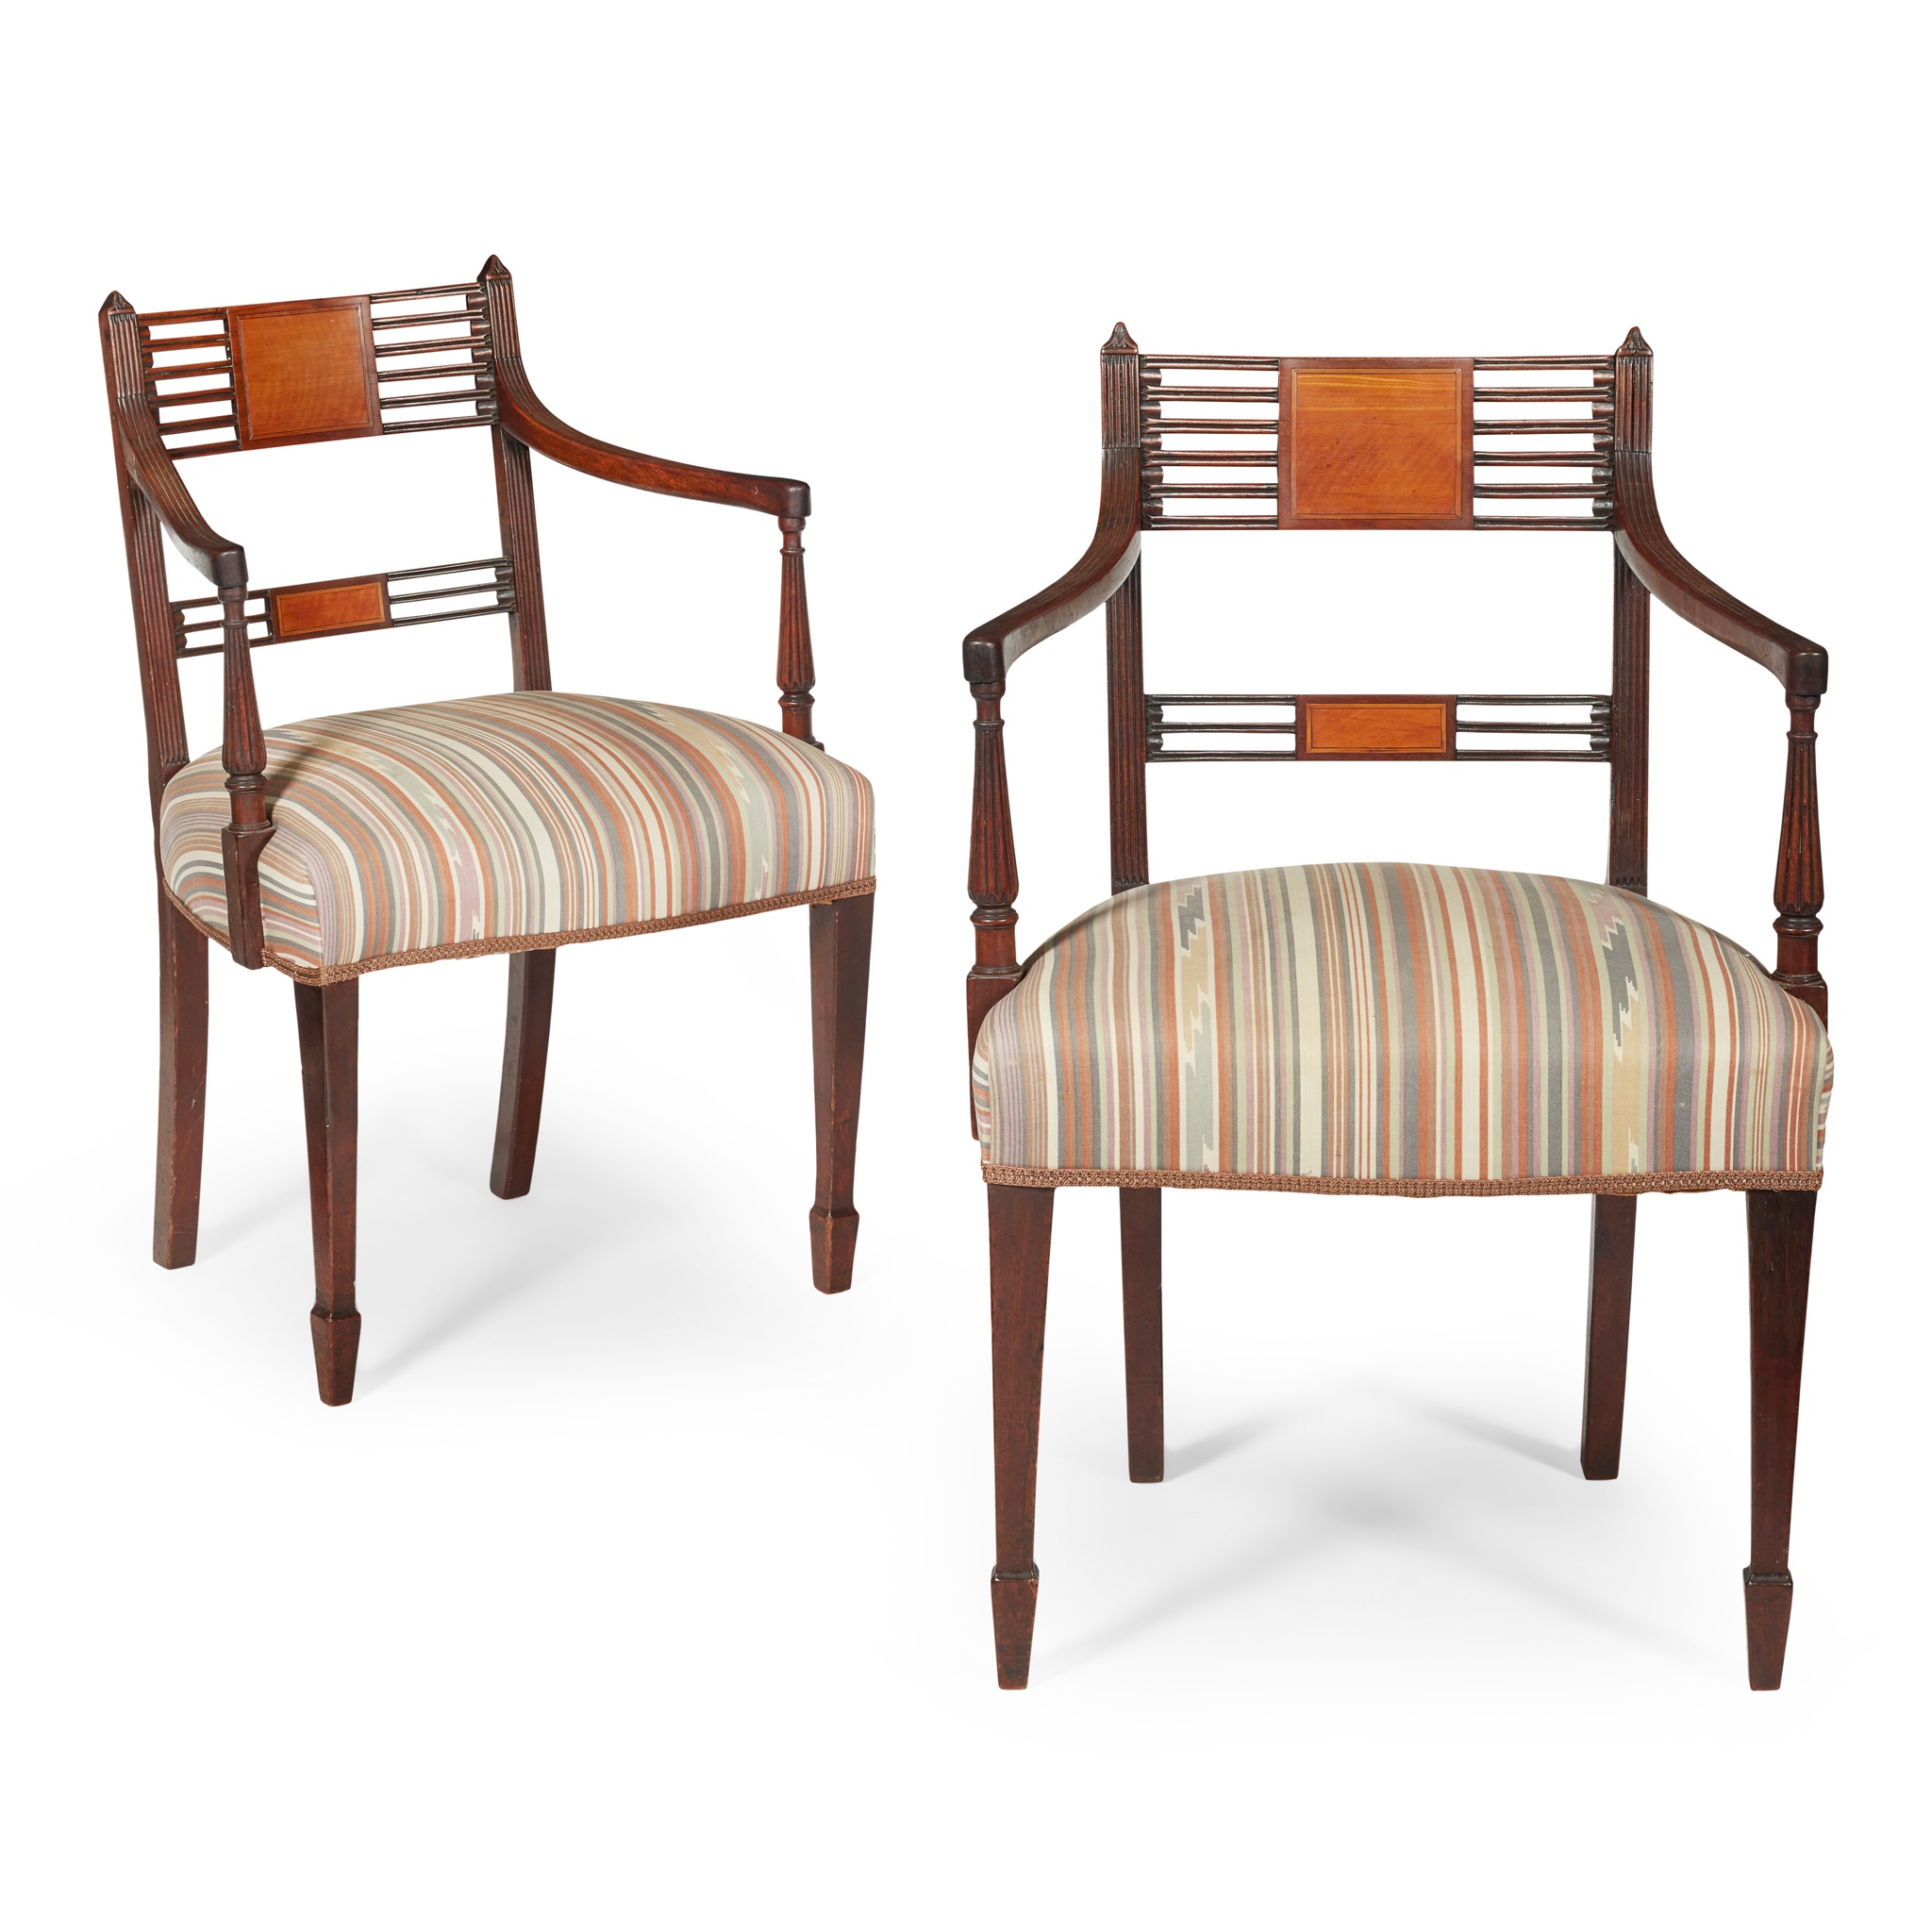 PAIR OF GEORGE III MAHOGANY AND SATINWOOD ARMCHAIRS LATE 18TH CENTURY - Image 2 of 2